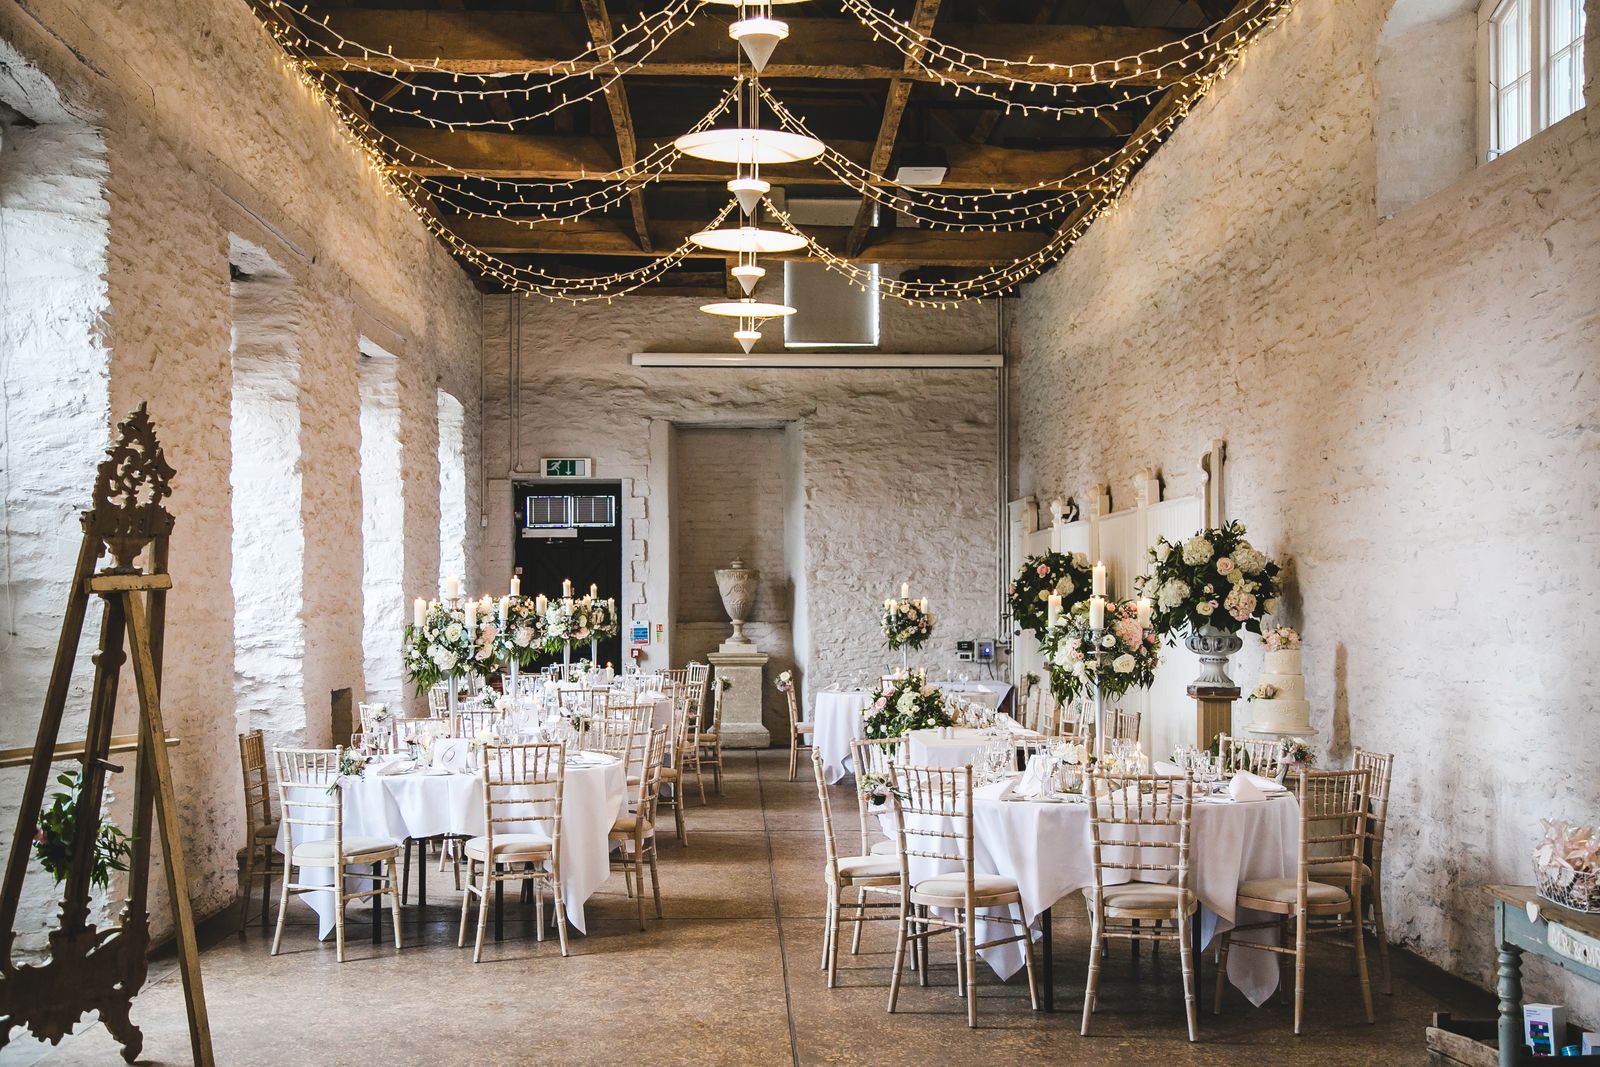 Stone barn style building with fairy light canopy, timber beams across the ceiling and romantic wedding tables.